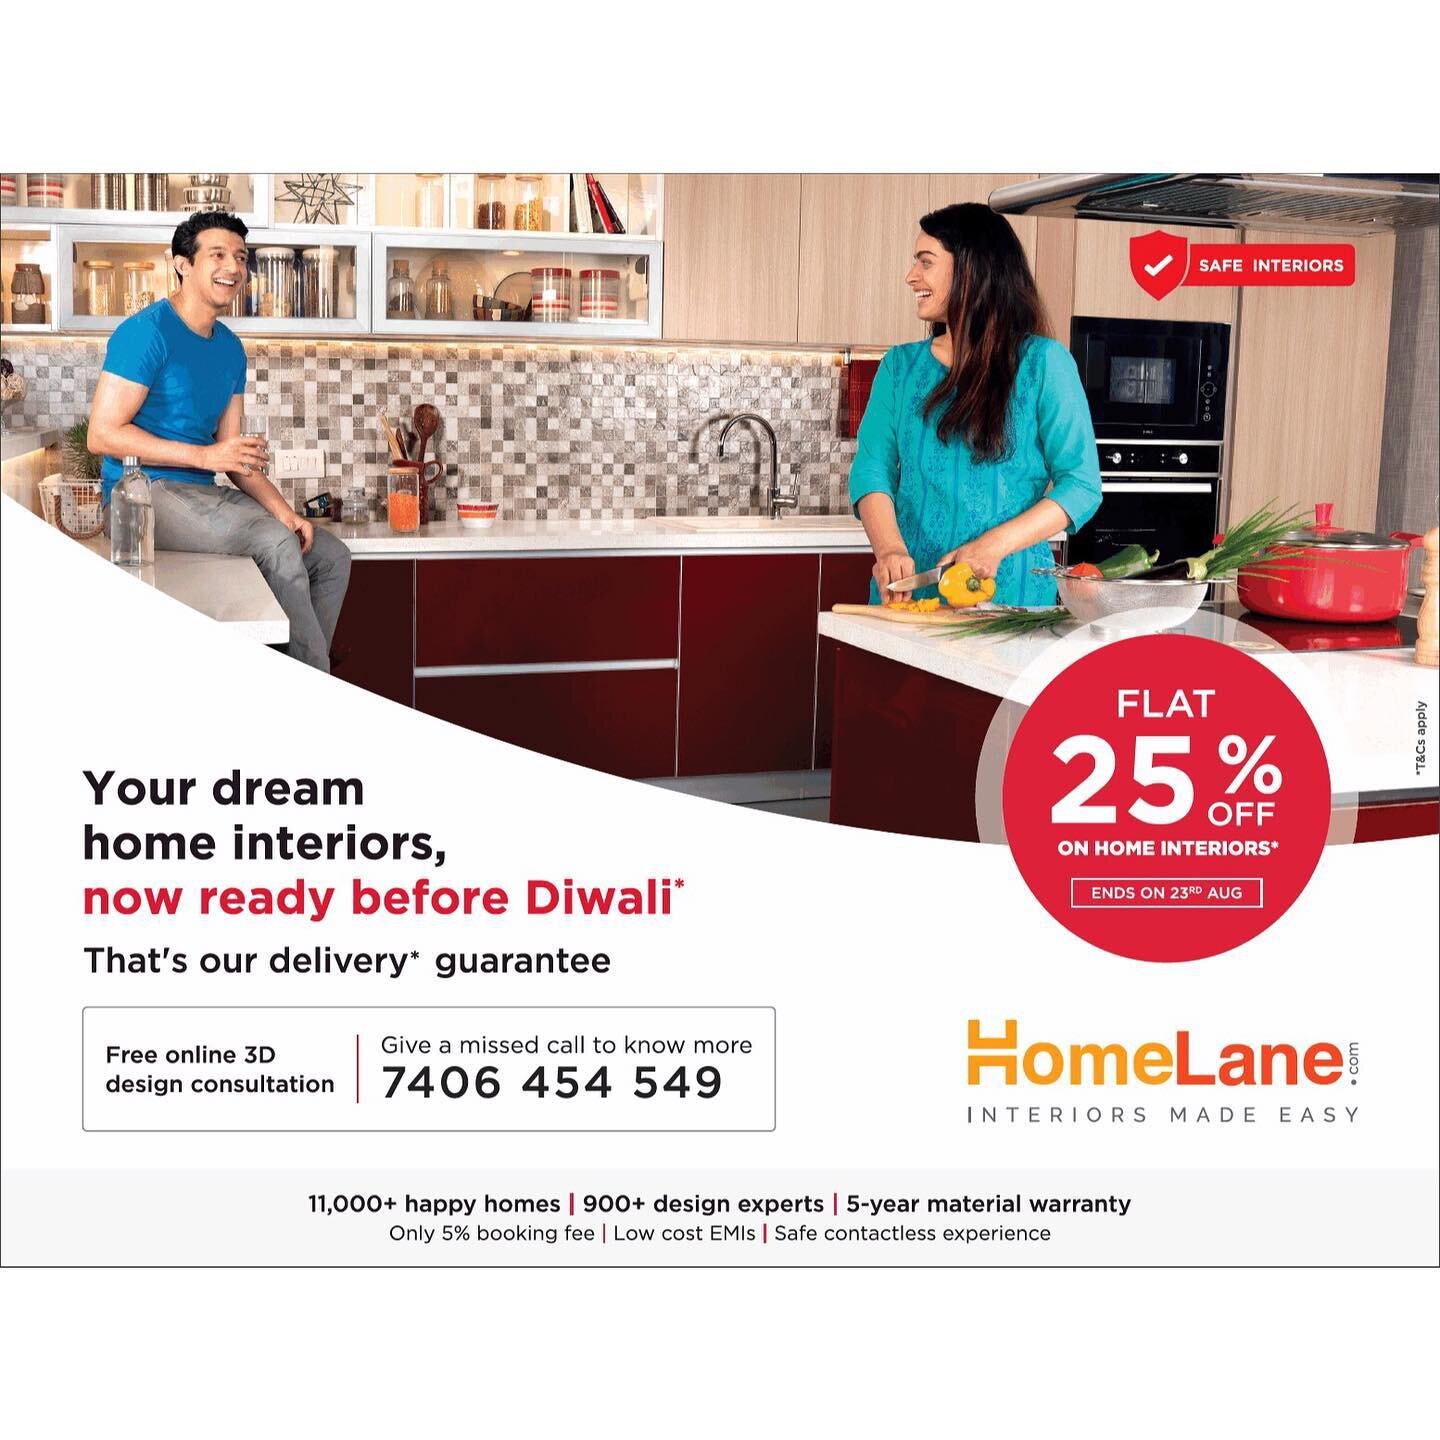 Spotted in today&rsquo;s Times of India newspaper. Ad for Home Lane!
.
#Model #Actor #Ad #TOI #TimesOfIndia #Newspaper #PrintAd #Advertisement #HomeLane #Bangalore #Bengaluru